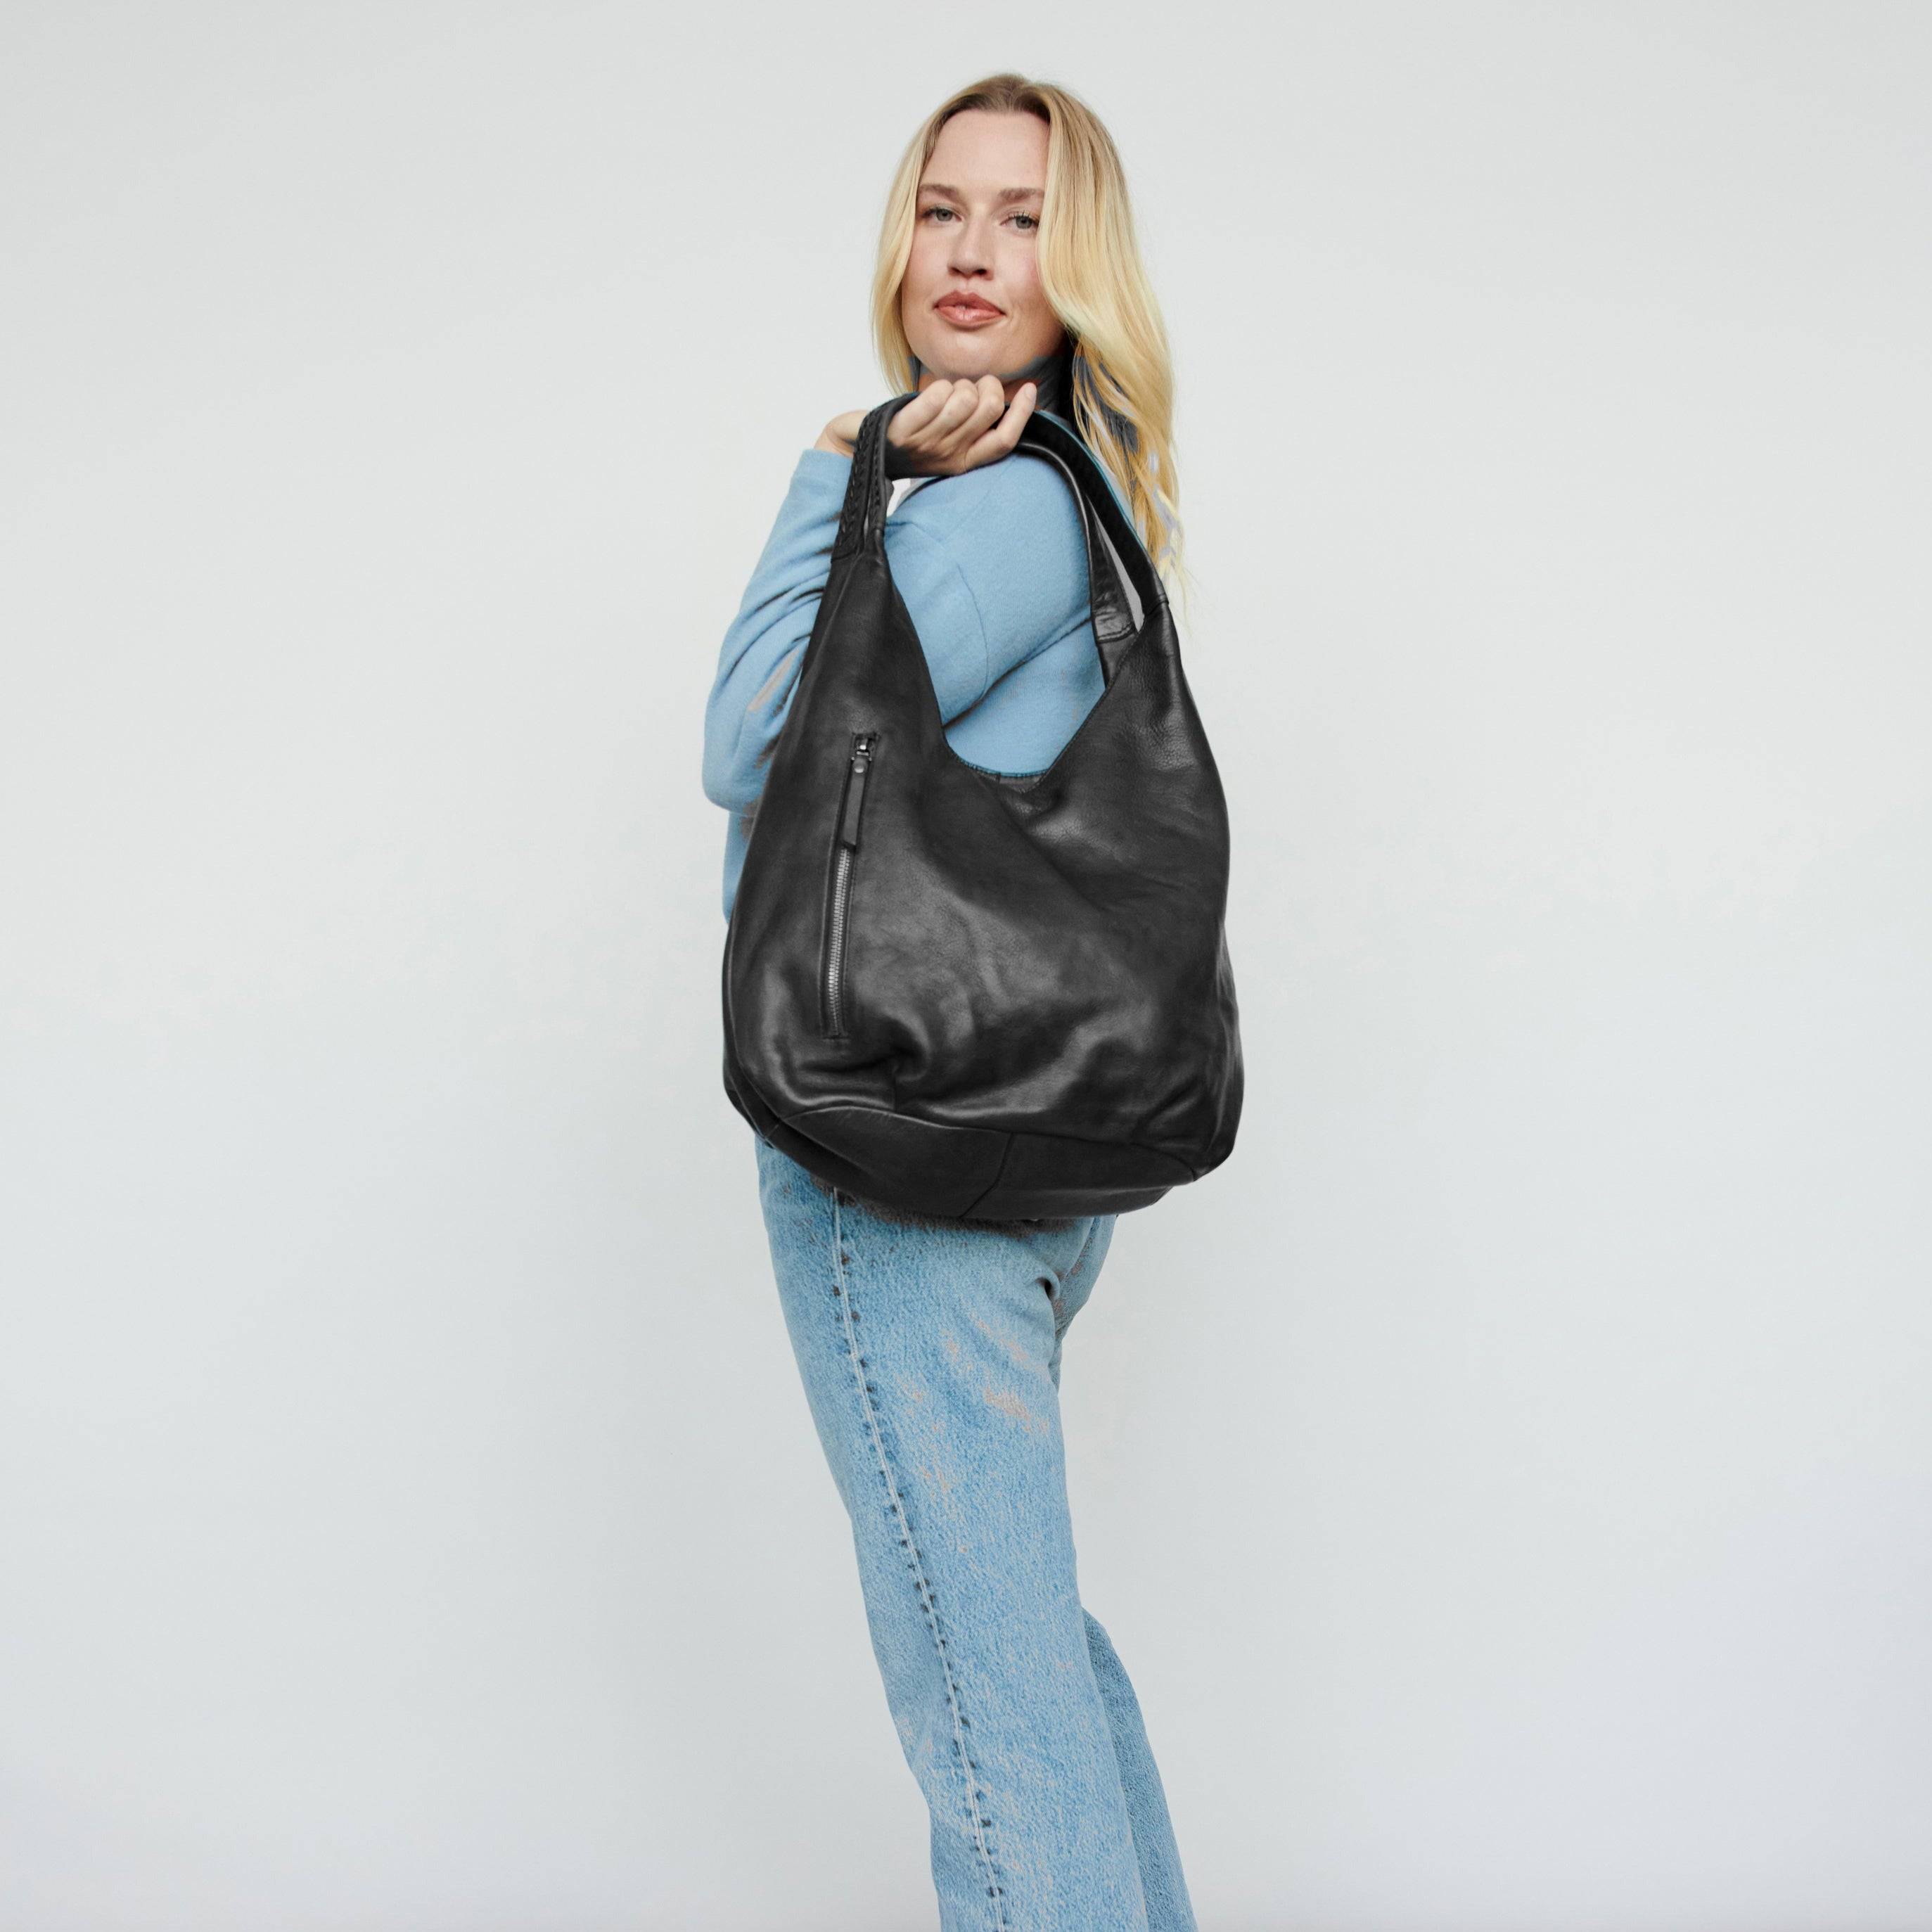 Camila shoulderbag is a gorgeous leather handbag  with multifunctional pockets